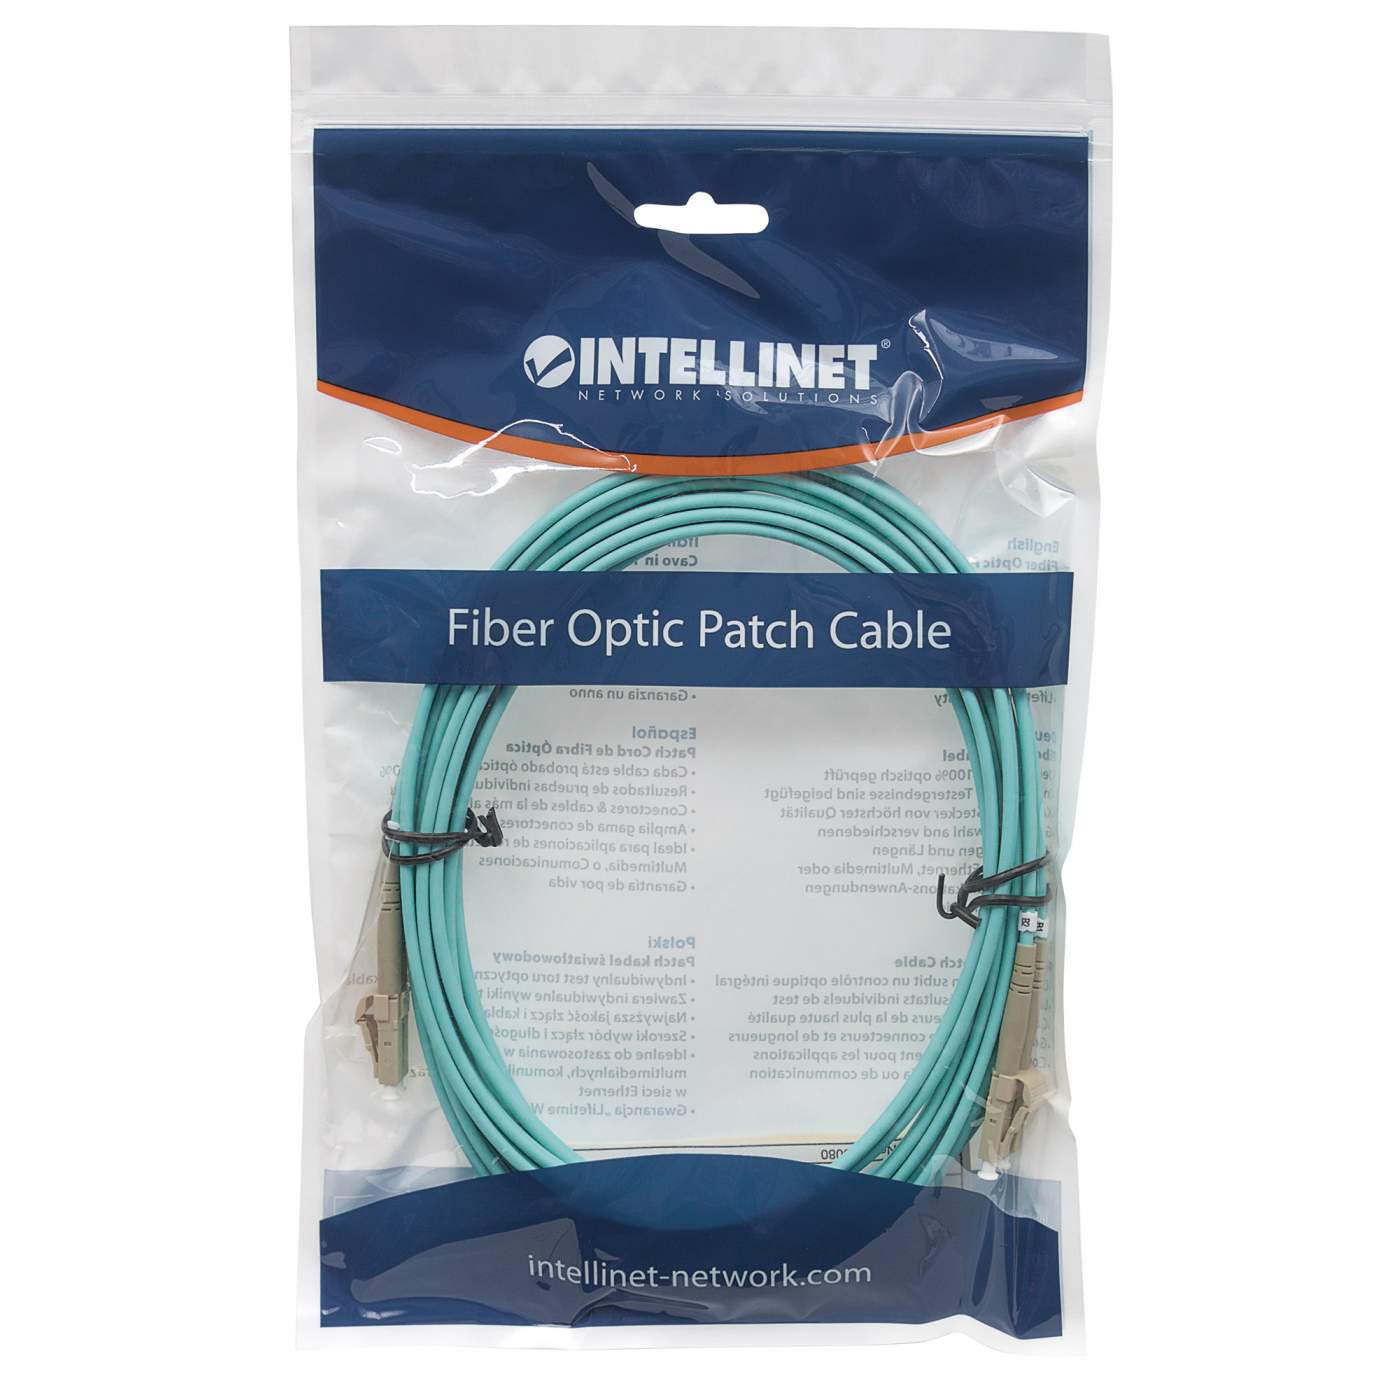 Fiber Optic Patch Cable, Duplex, Multimode Packaging Image 2